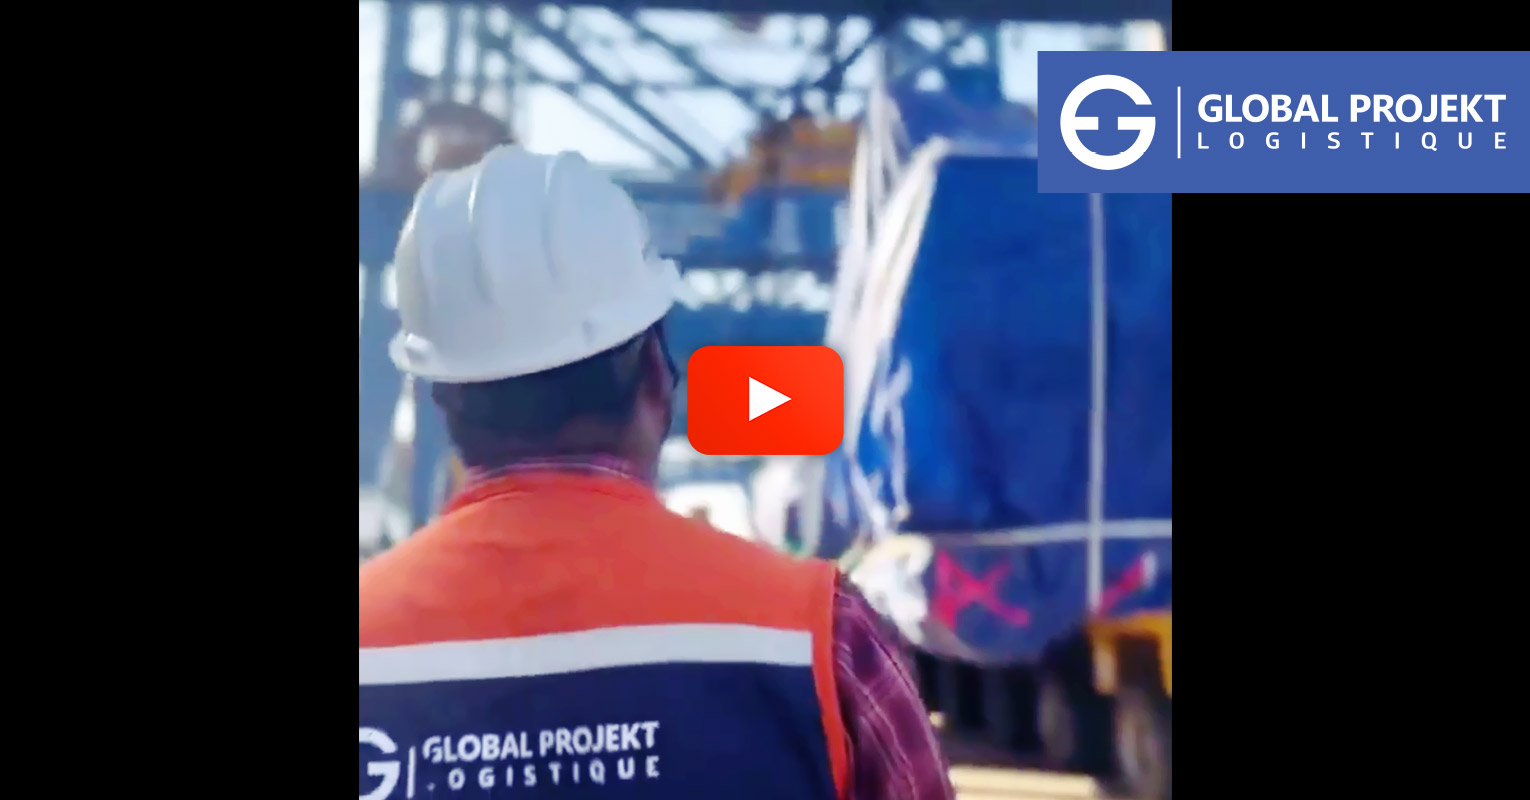 Global Projekt Logistique Executed a Second Project from Mundra (India) to Houston (USA)